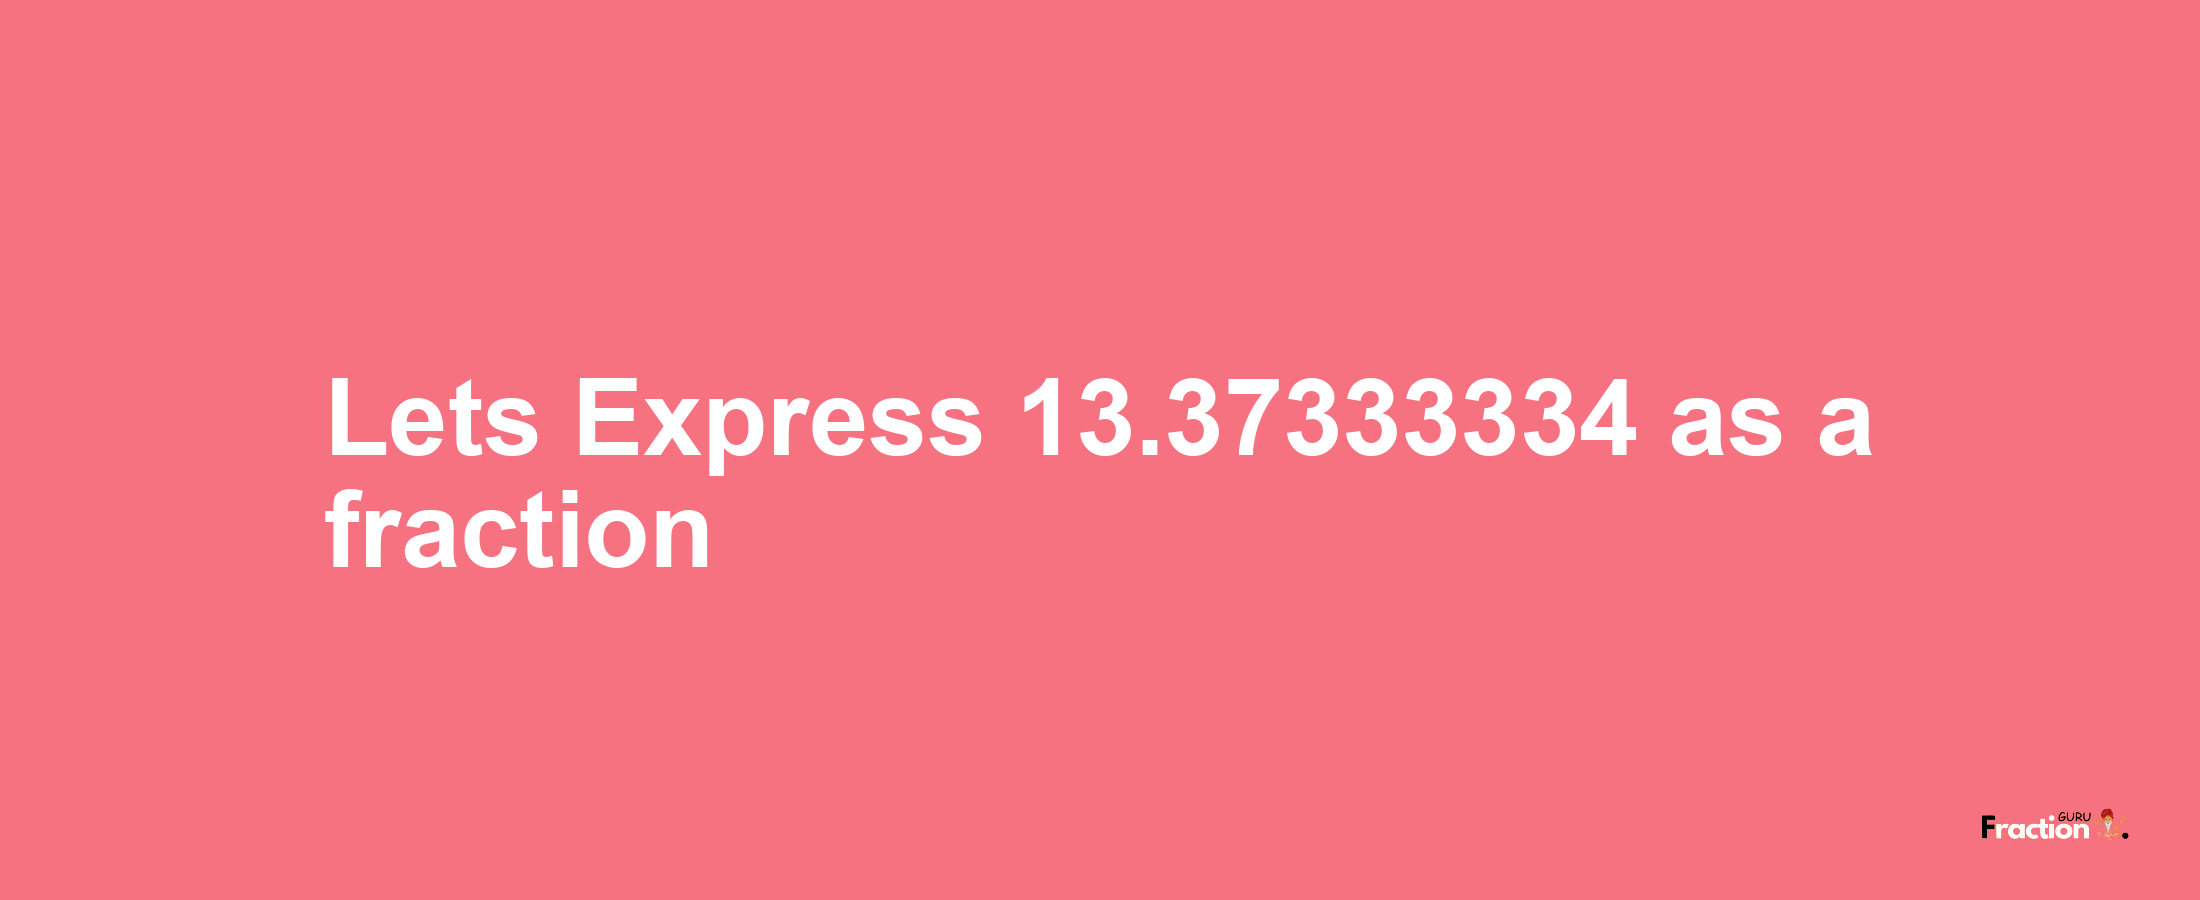 Lets Express 13.37333334 as afraction